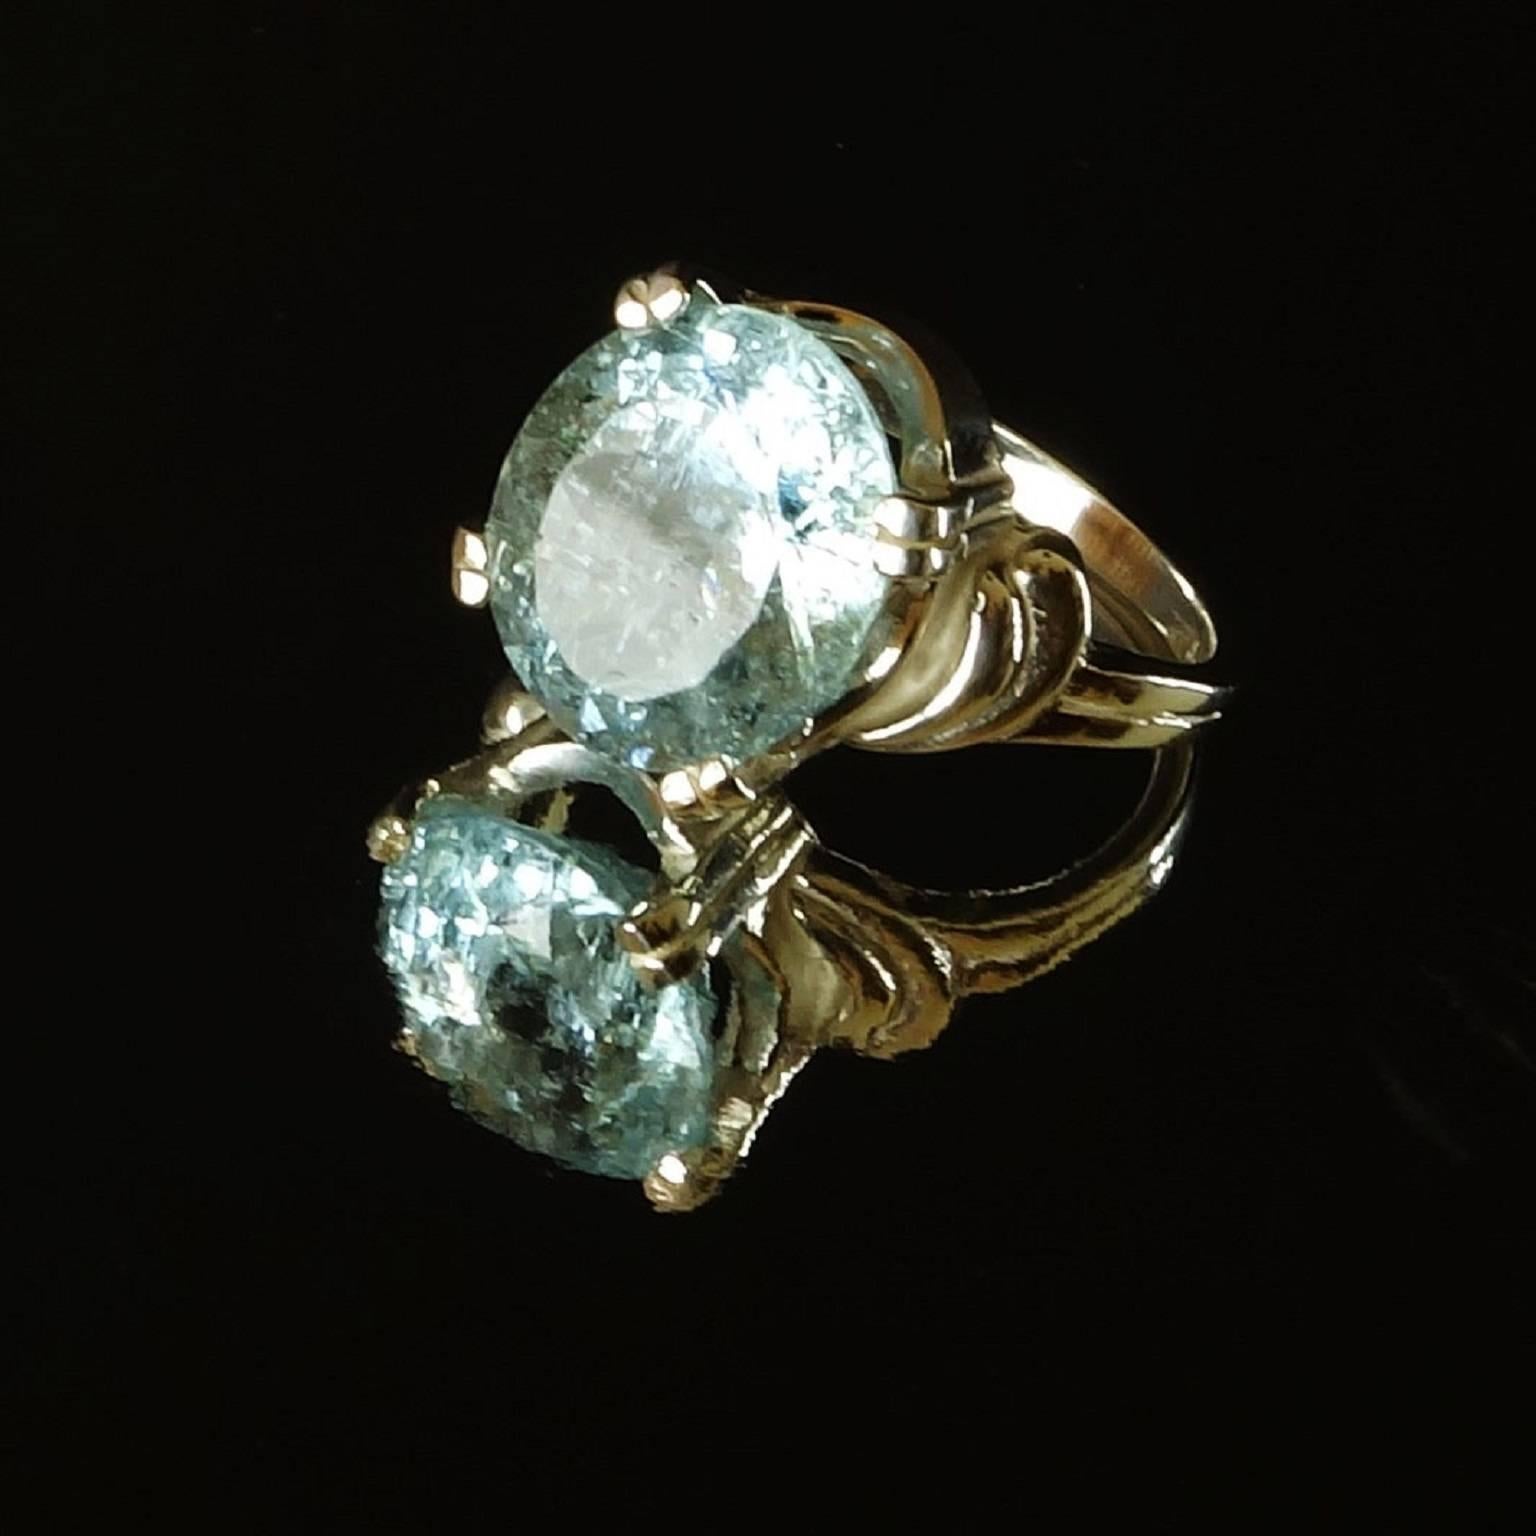 Sparkling oval Aquamarine in a delightful setting of Sterling Silver which complements the gemstone.  This Aquamarine has inclusions typical of Beryls which reflect the light and enhance to sparkle.  The gemstone measures 13x10mm and weighs